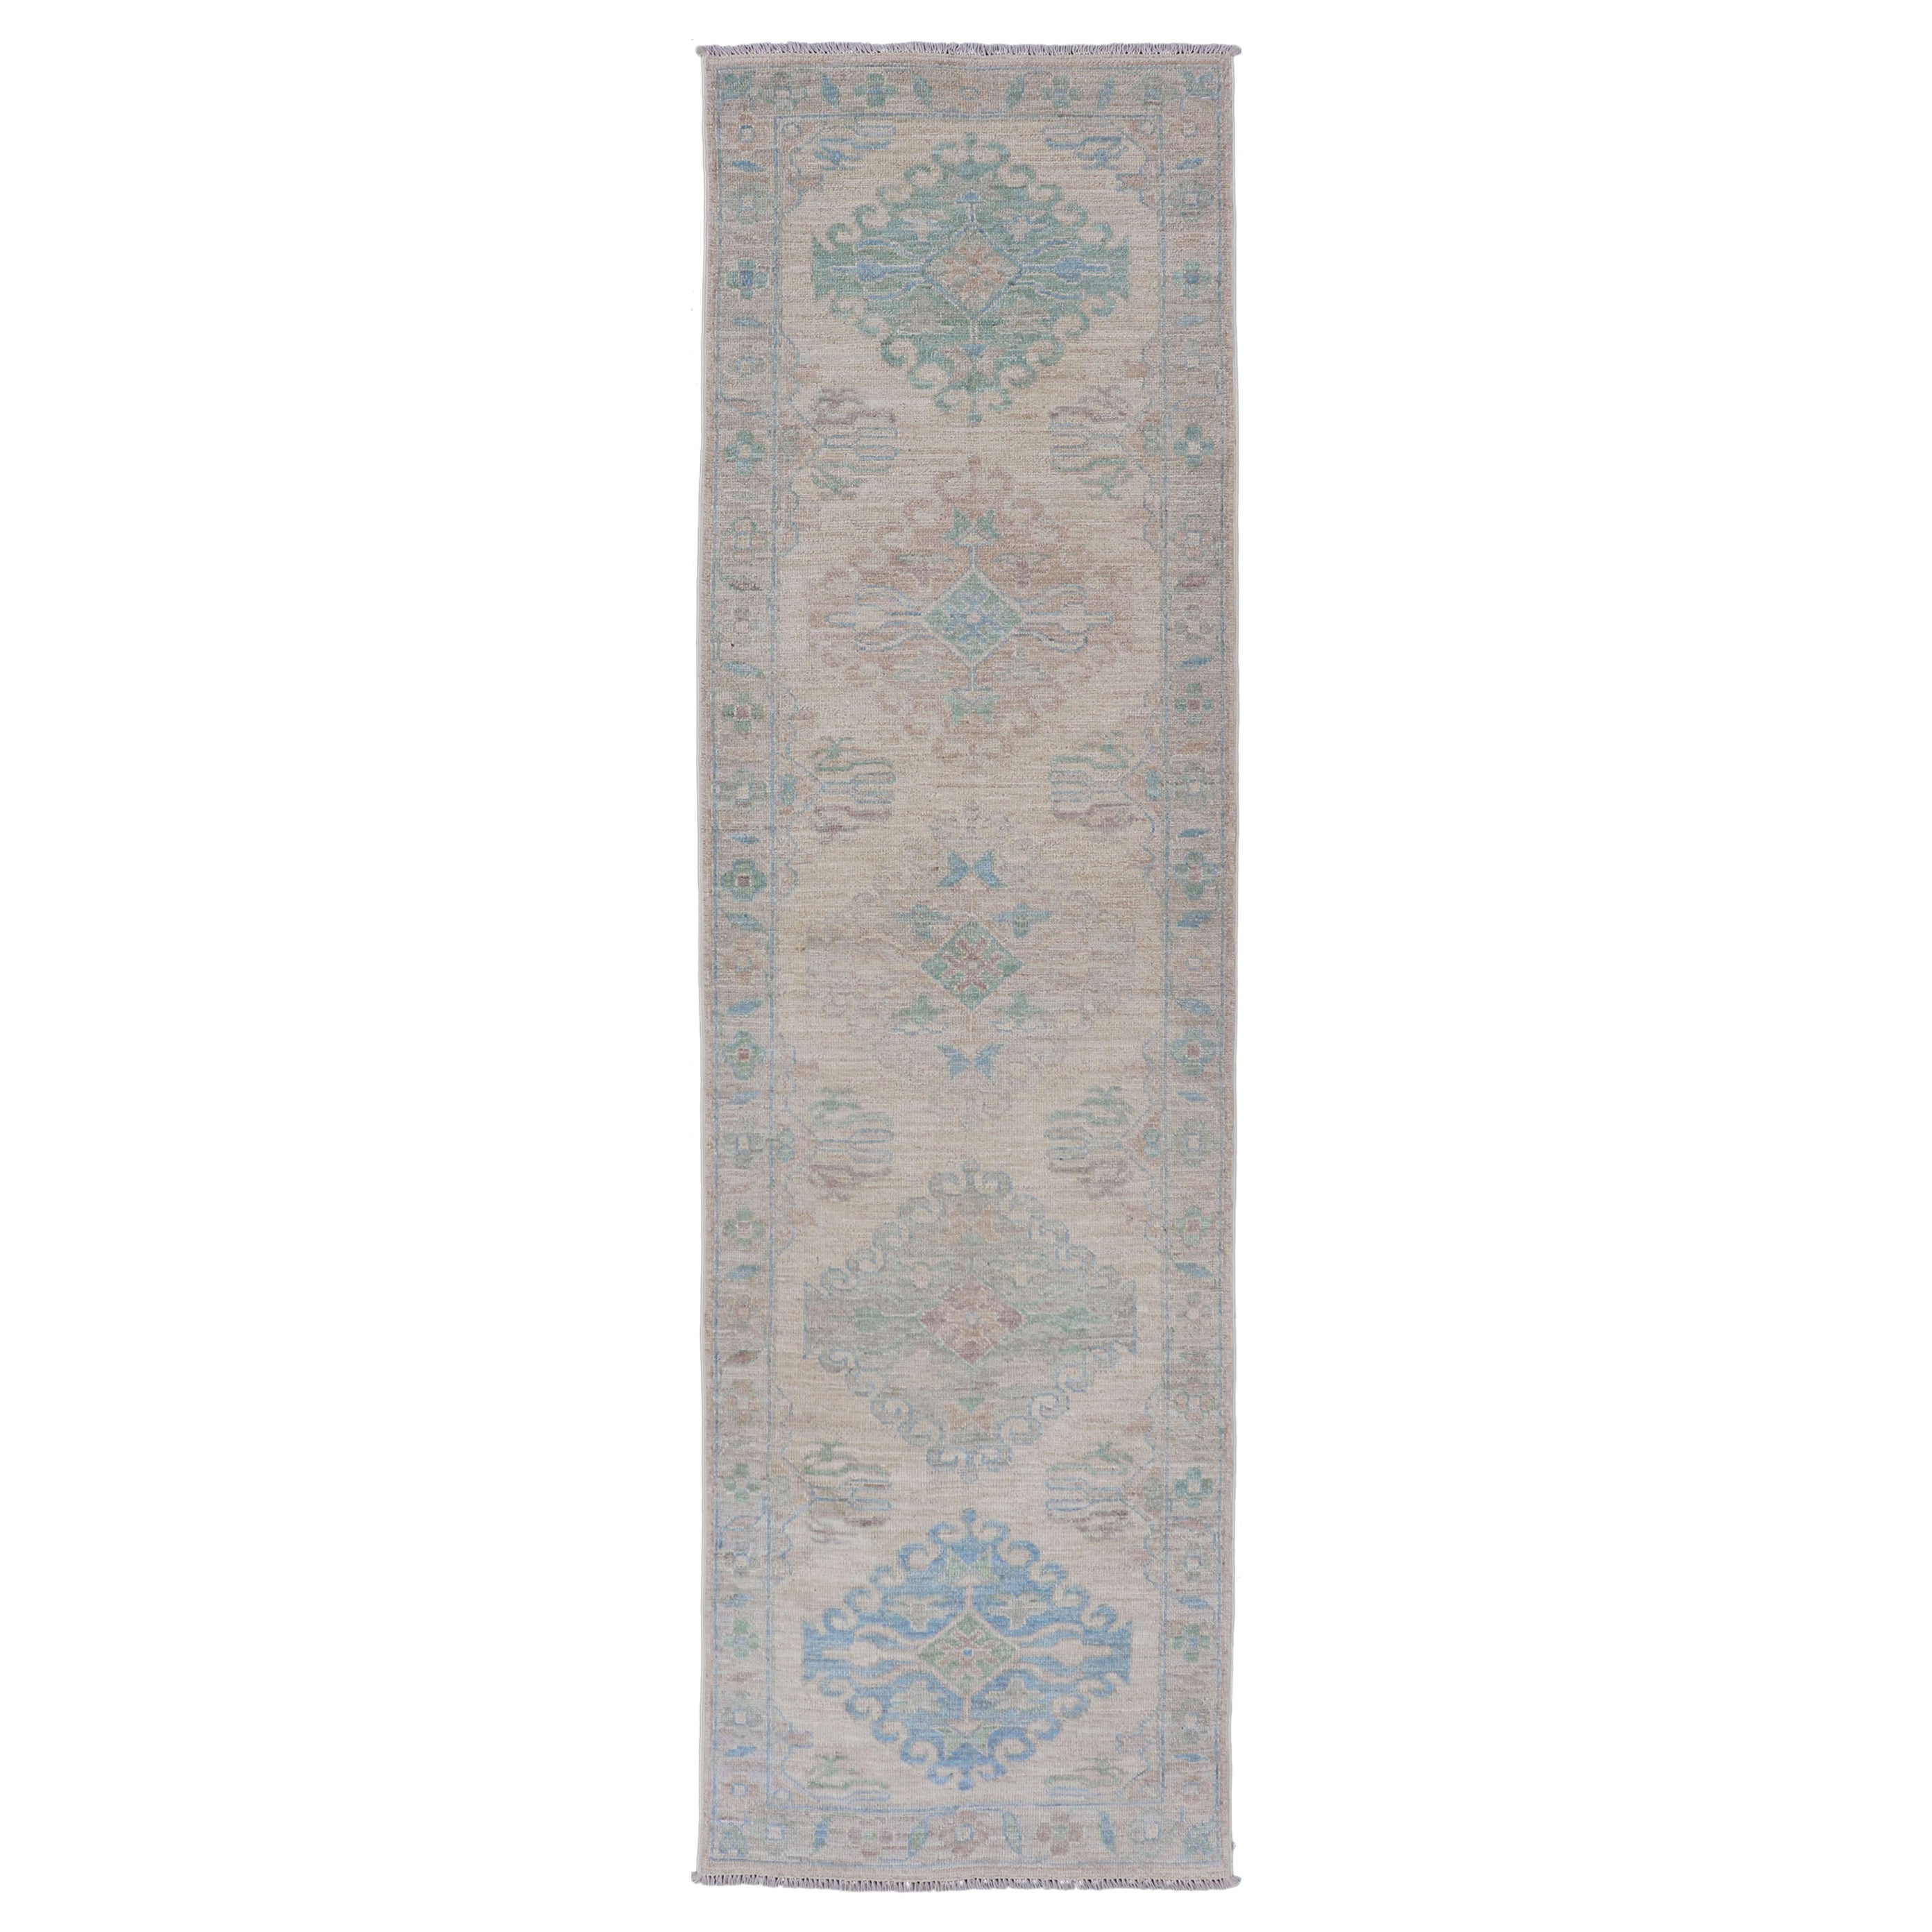 Oushak Runner with Medallion Design on a Cream Field with Blues and Green